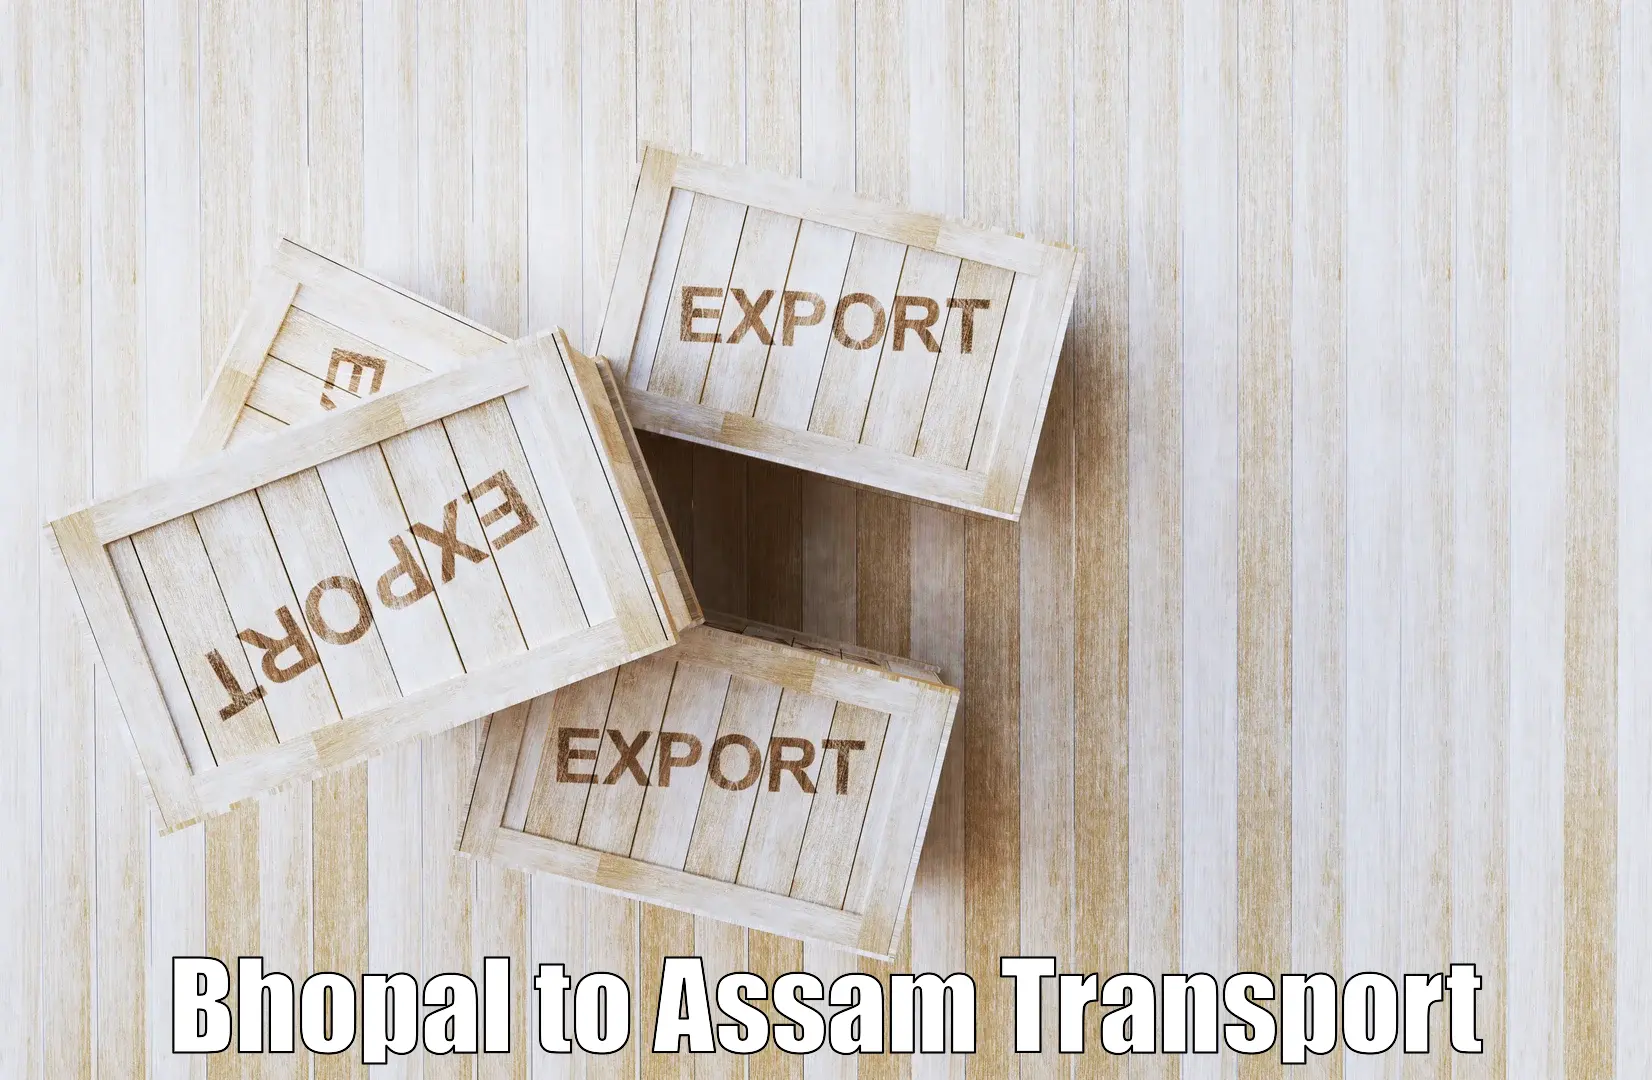 Transport in sharing Bhopal to Assam